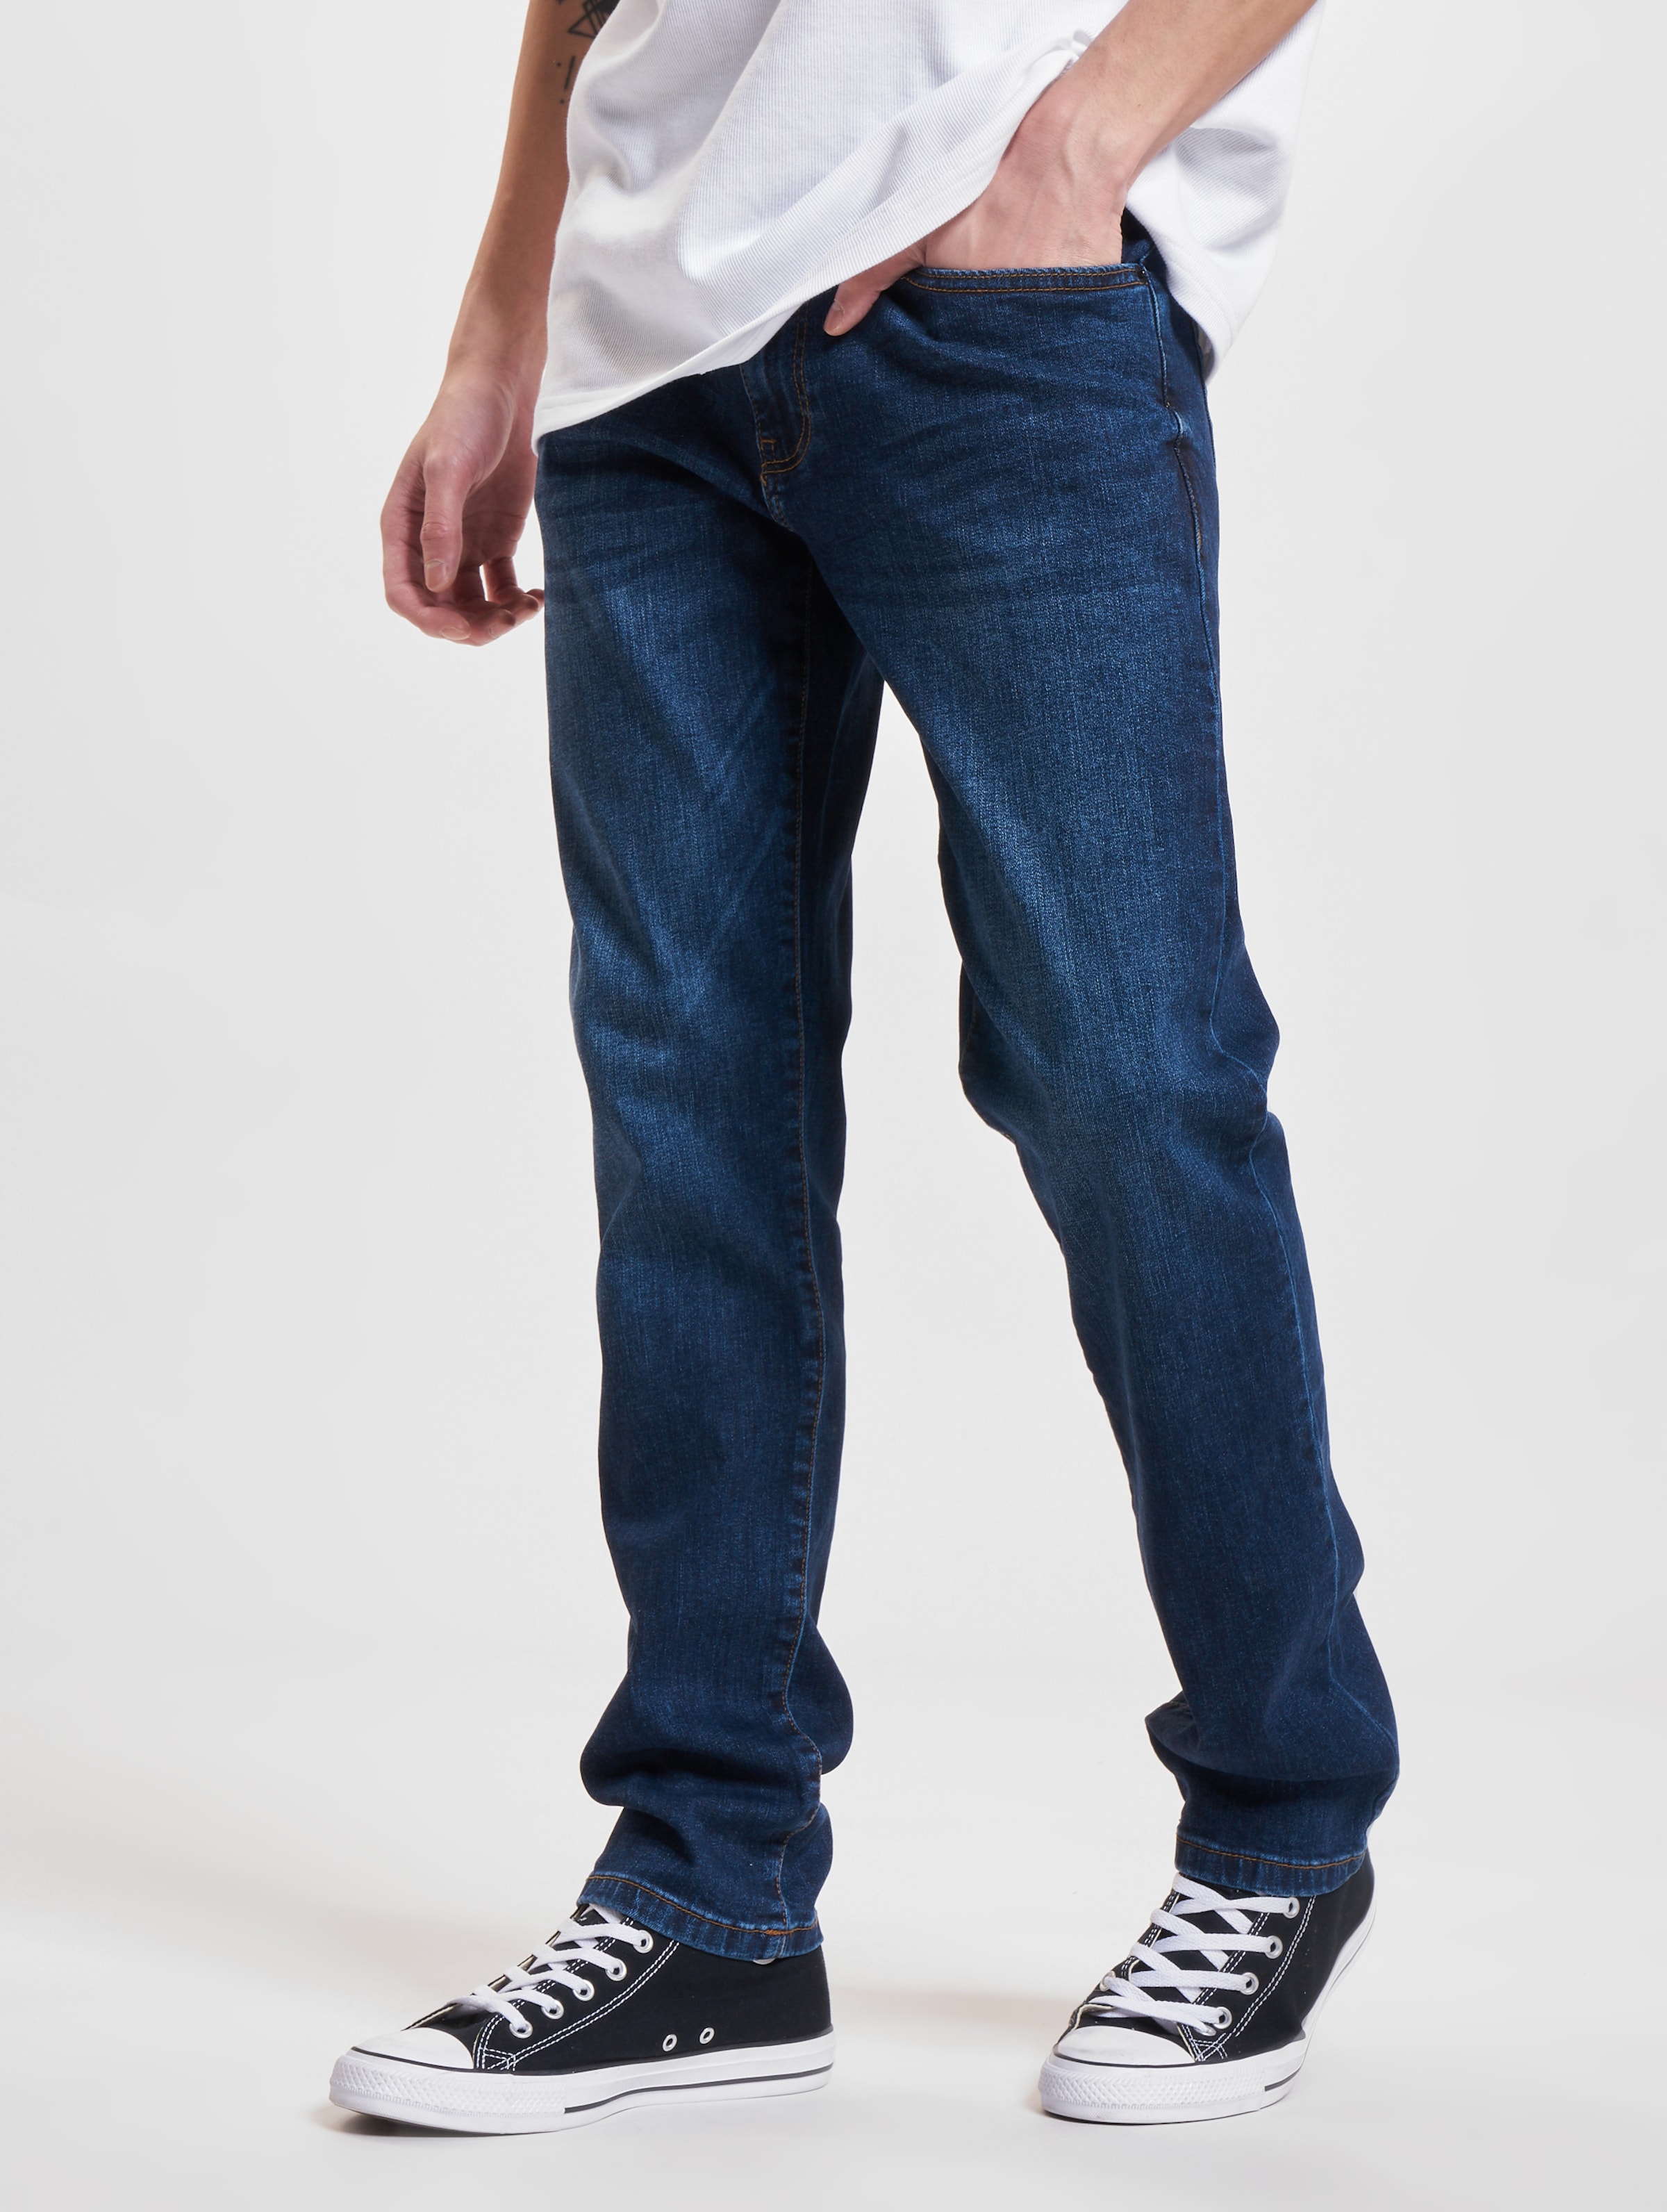 ONLY & SONS ONSWEFT REG.DK. BLUE 6752 DNM JEANS NOOS Heren Jeans - Maat W32 X L32